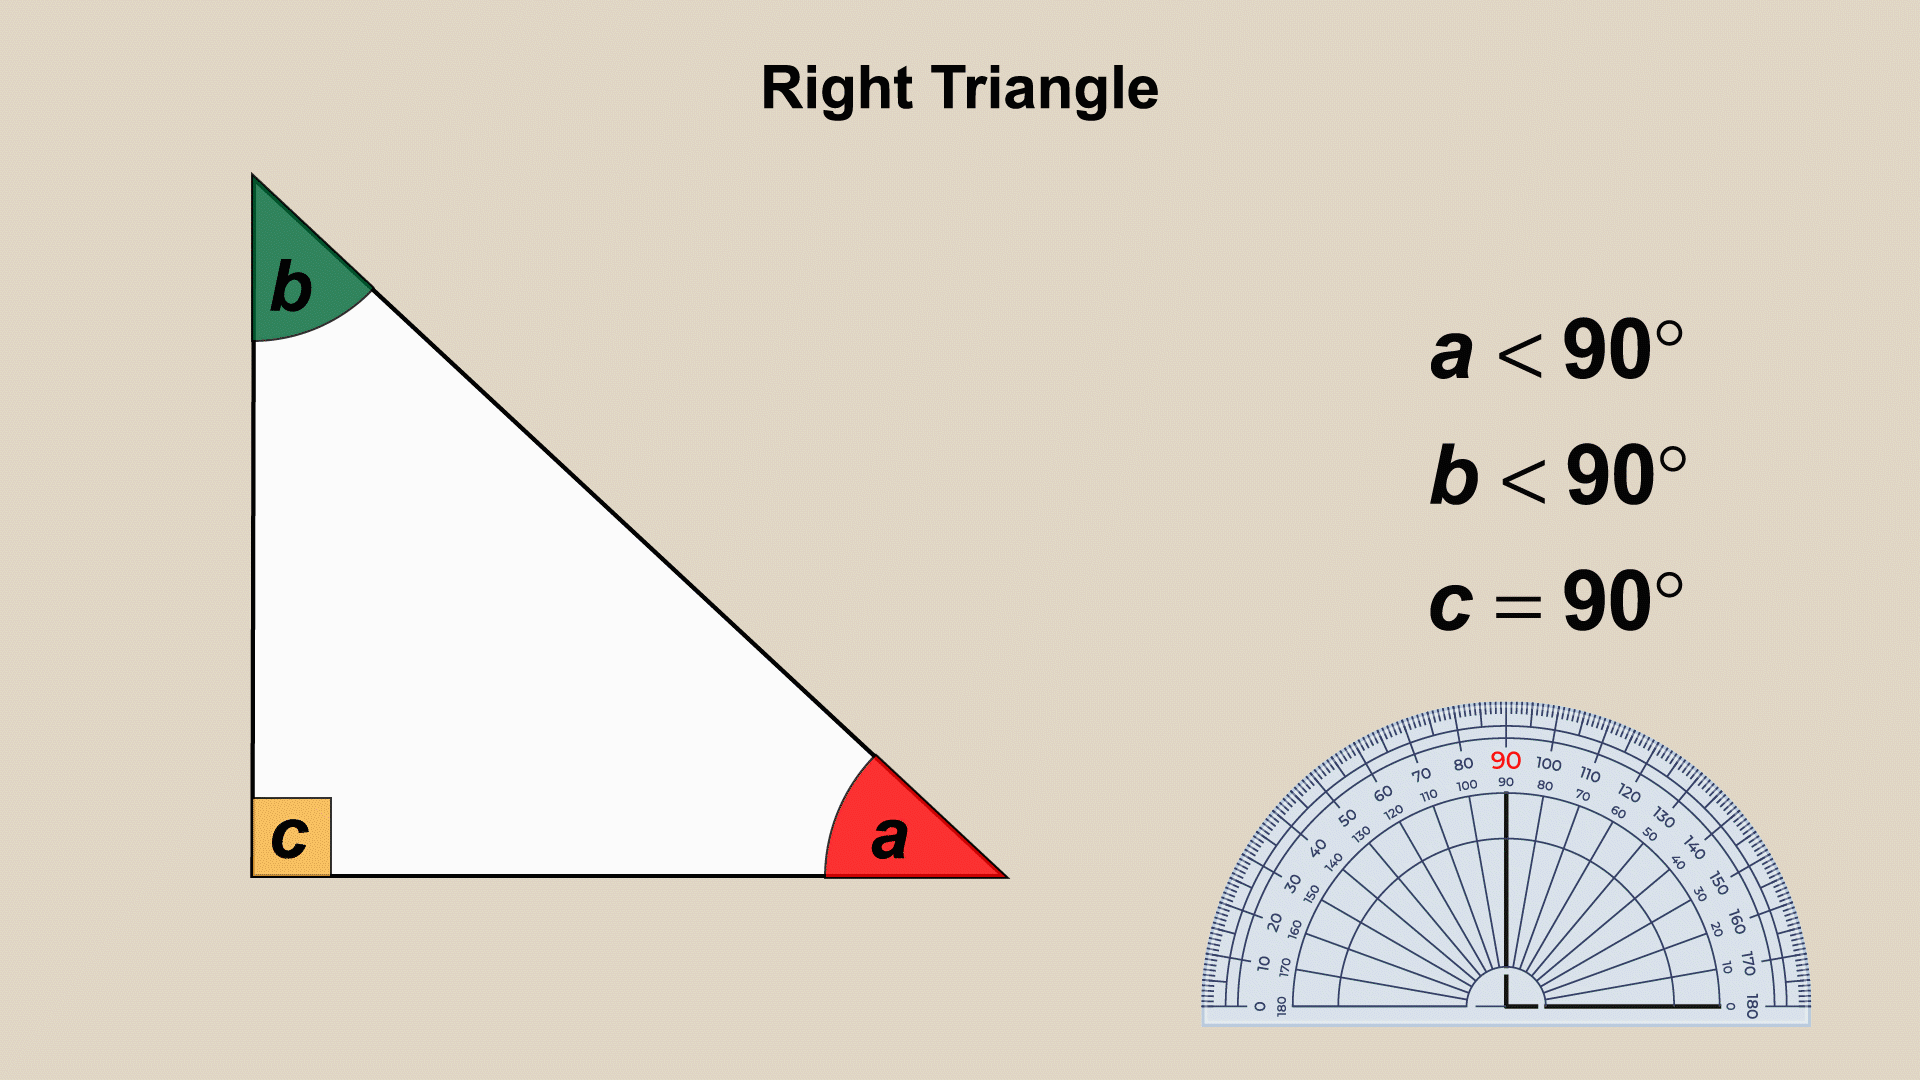 This piece of animated math clip art shows the properties of a right triangle.